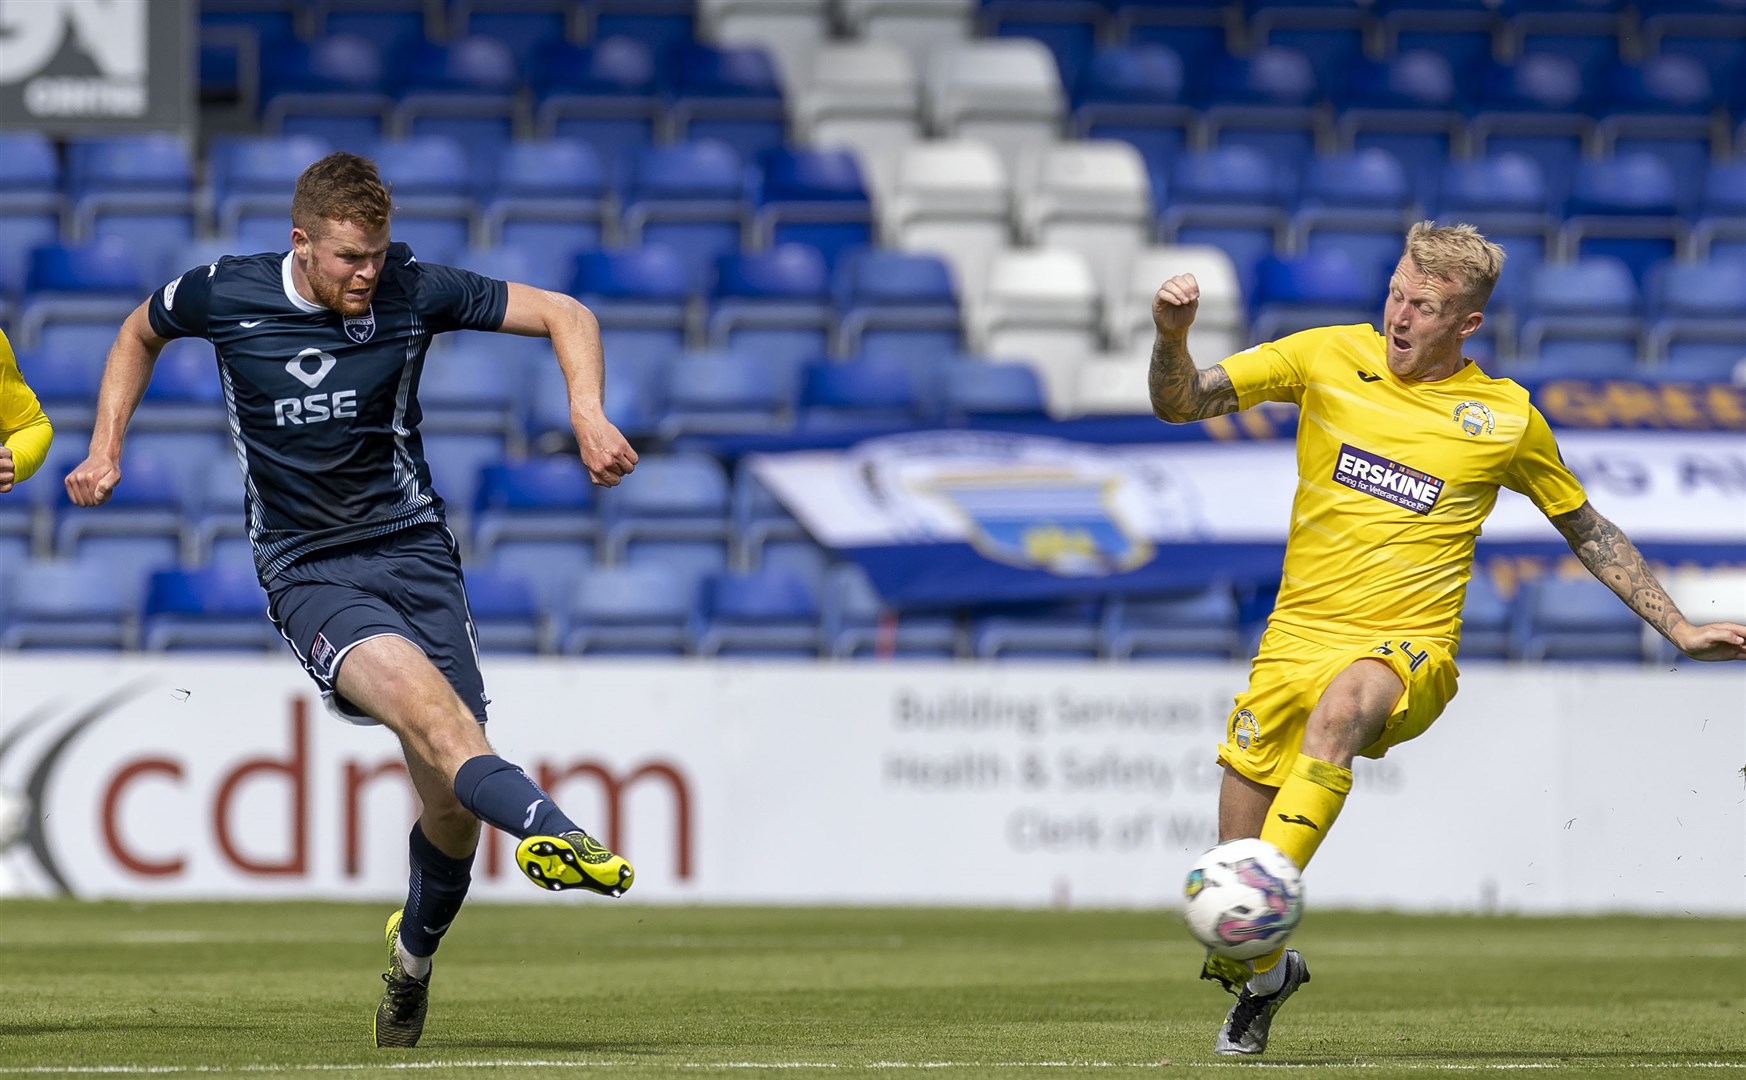 Picture - Ken Macpherson. SCOTTISH LEAGUE CUP (Viaplay Cup) group stage: Ross County(2) v Morton(1). 22.07.23. Ross County's Scott Allardice clears danger.